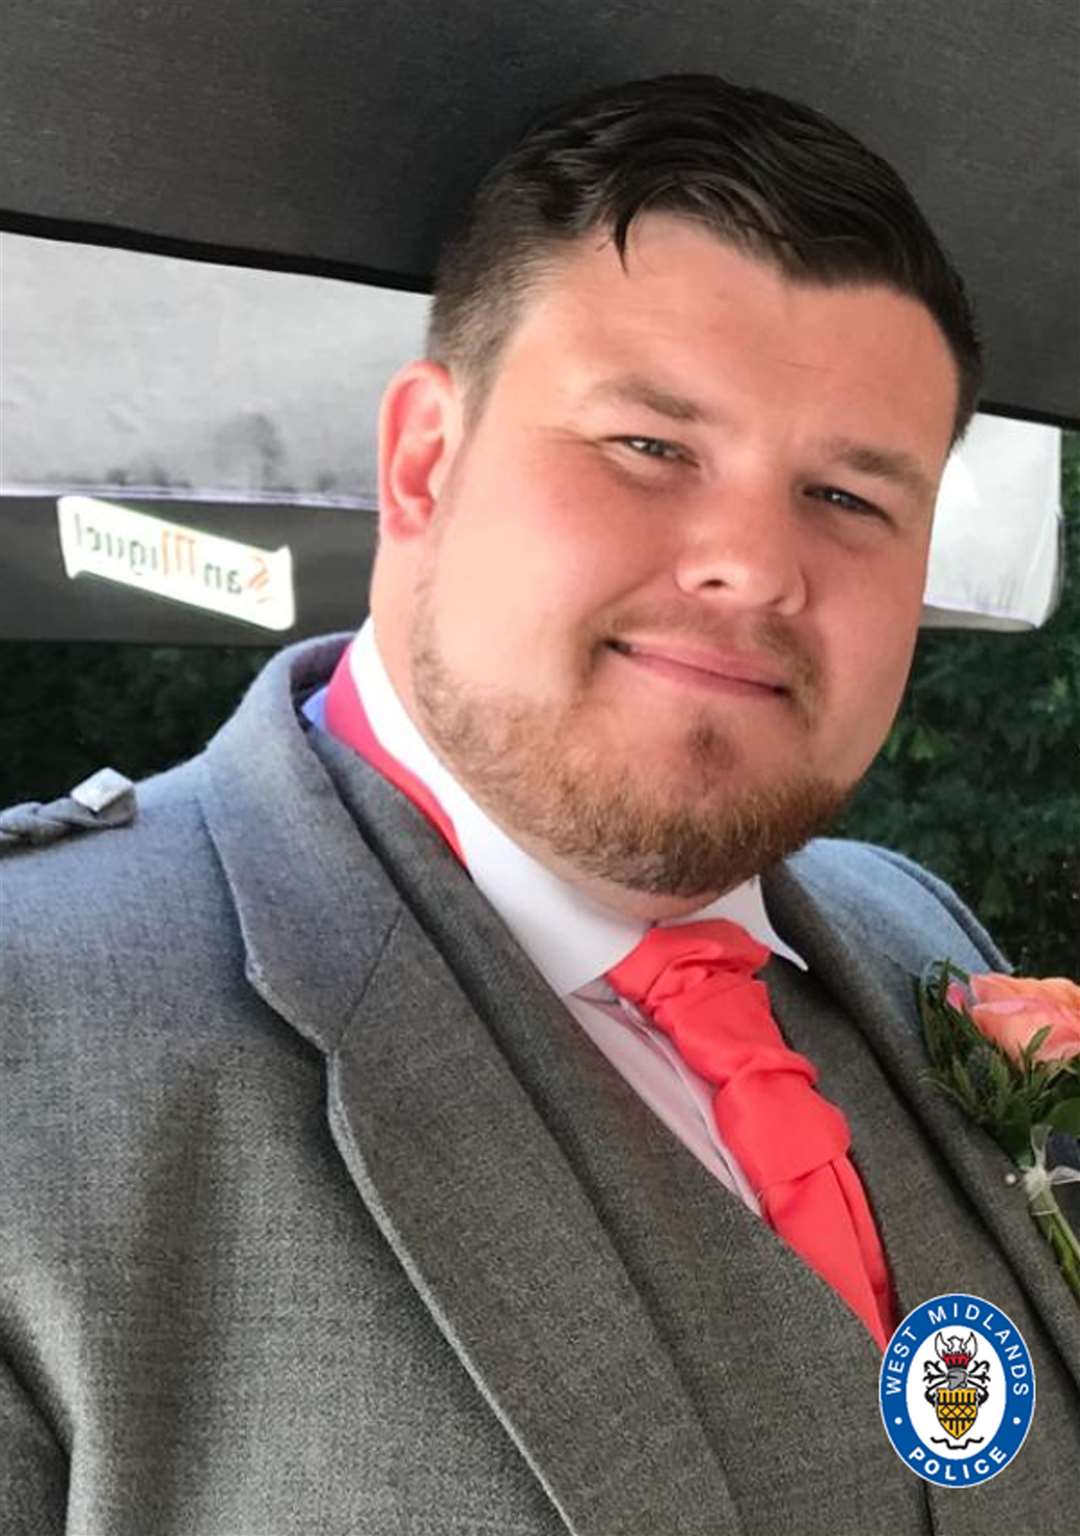 Brian McIntosh, 29, was in the driver’s seat of his Range Rover, where he was found shot dead (Family/West Midlands Police/PA)